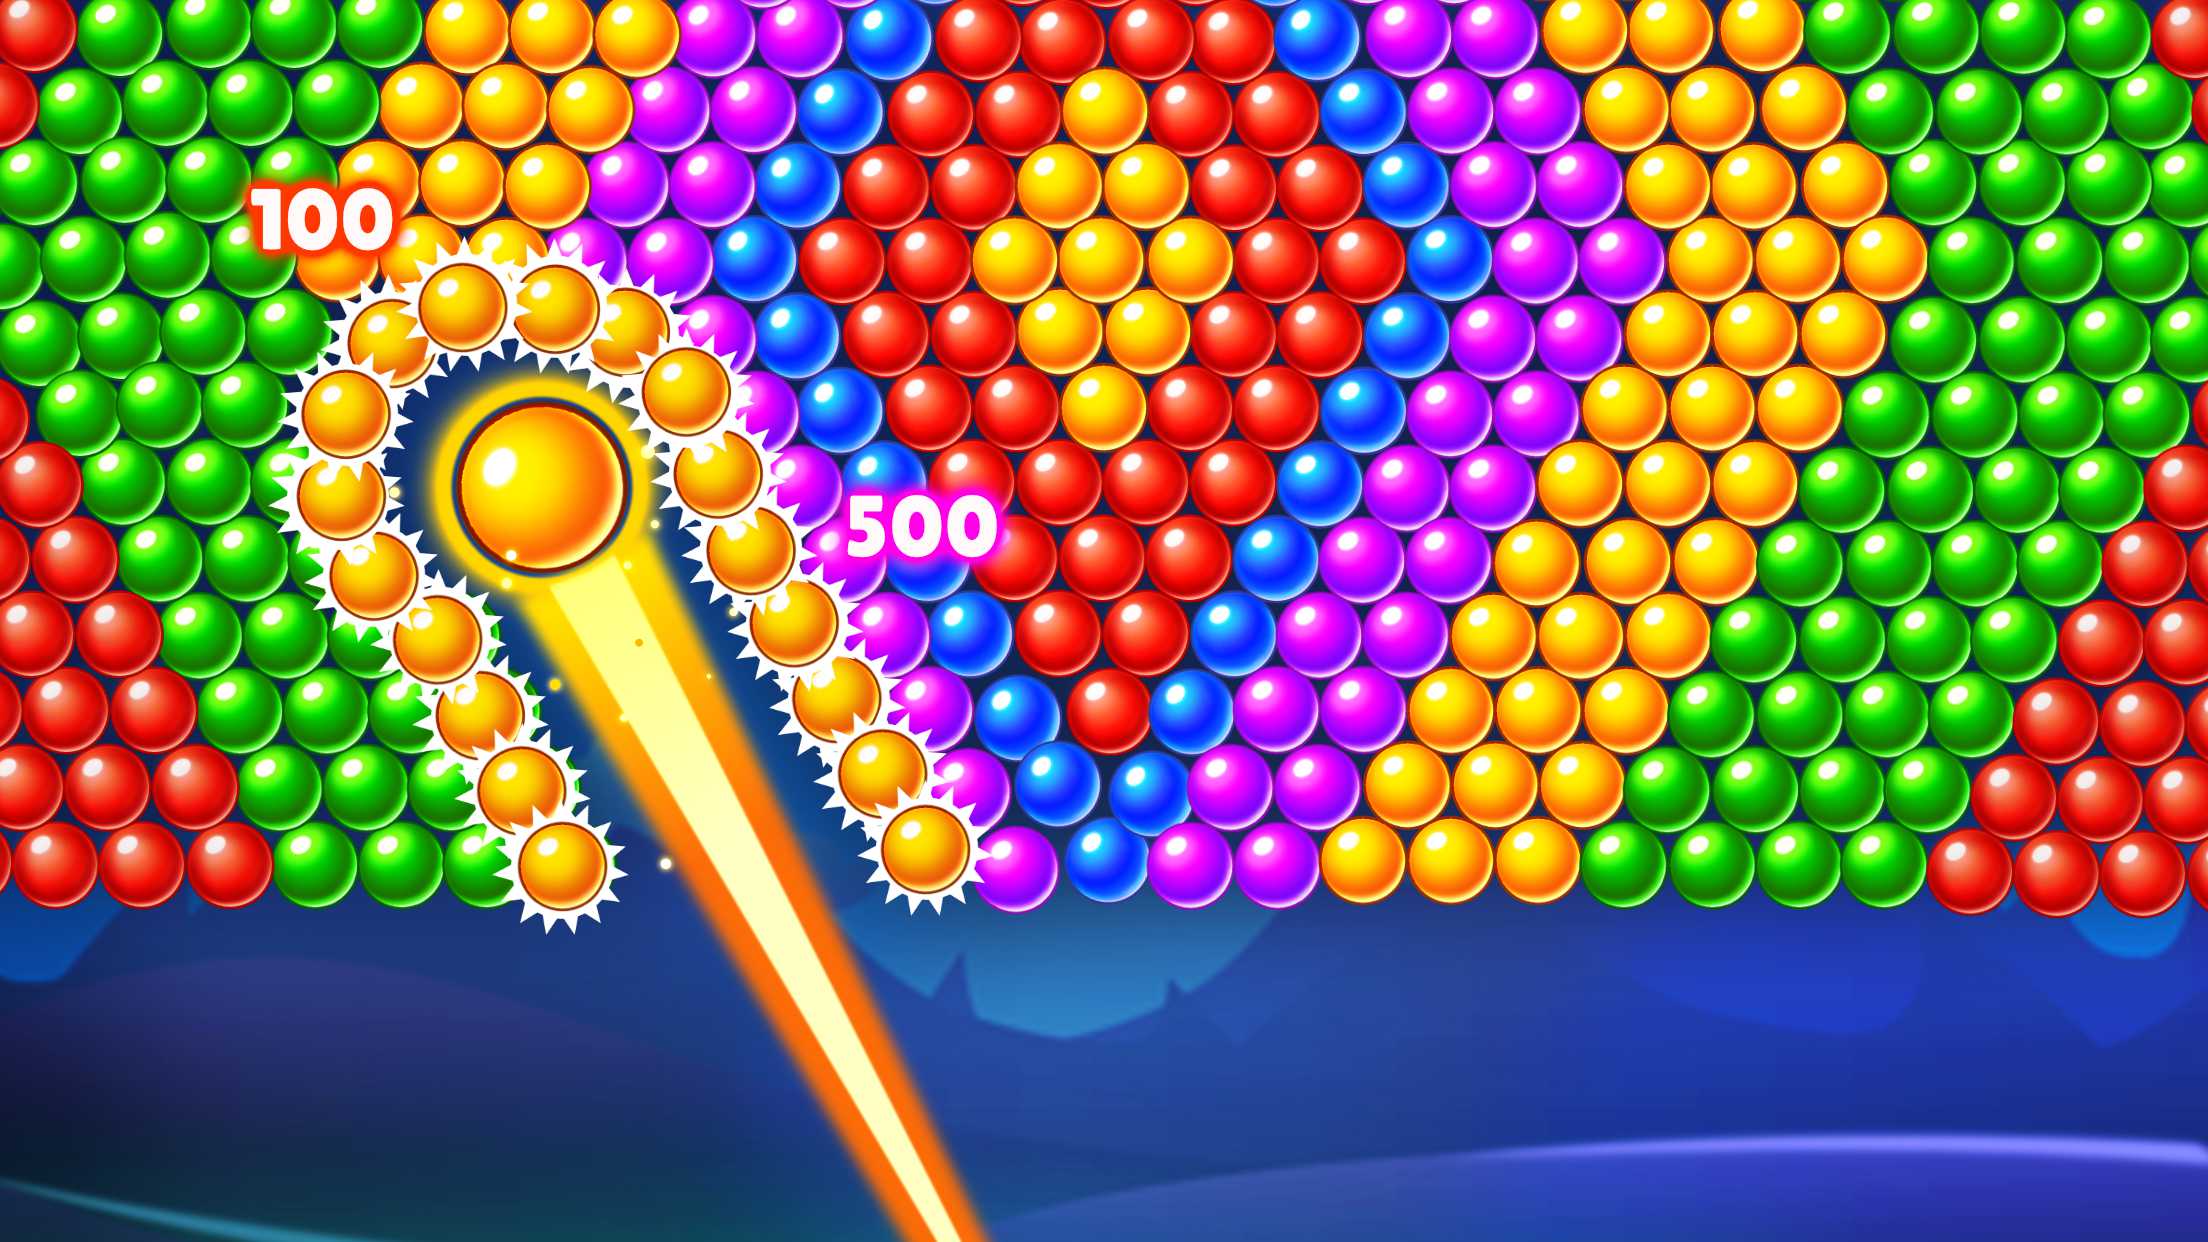 Bubble Shooter Pastry Pop